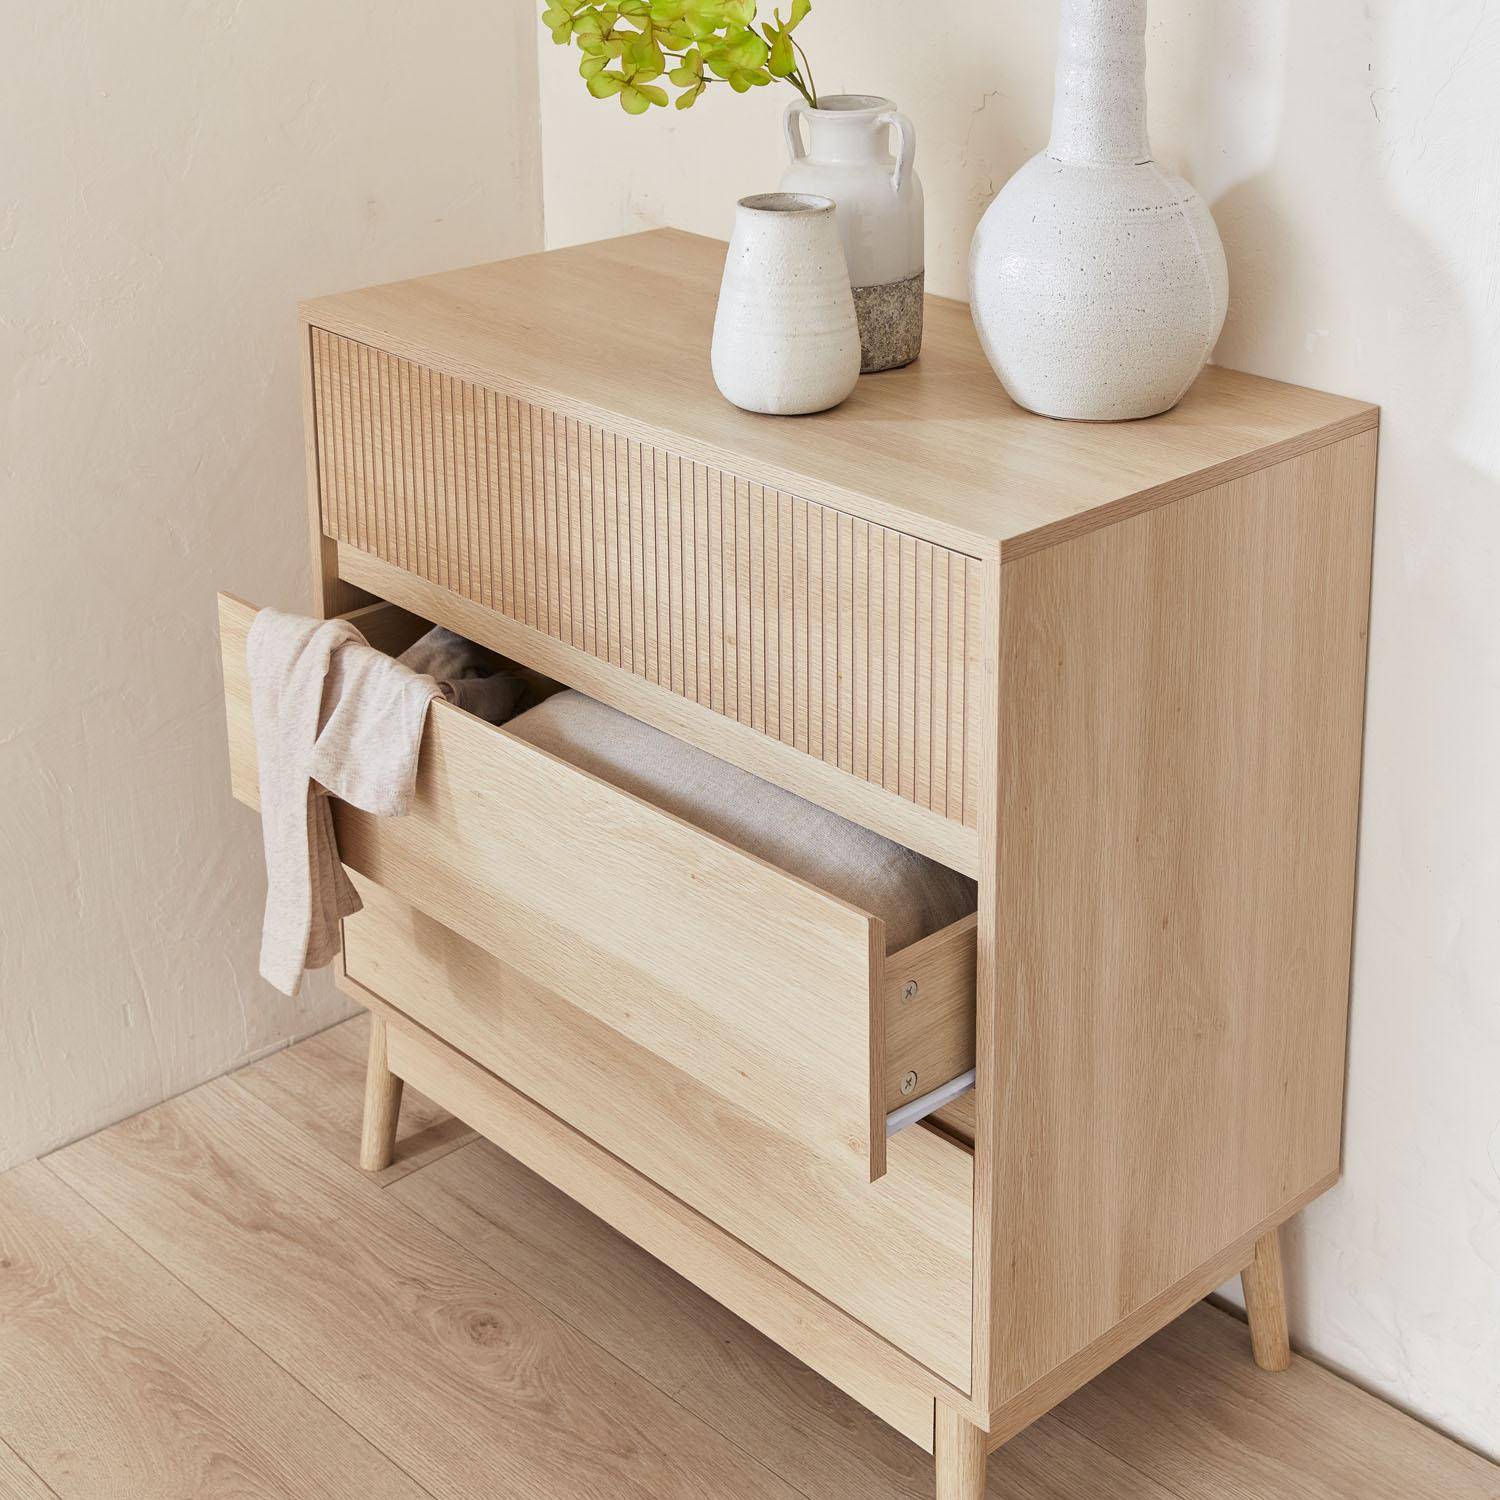 Grooved wood detail 3-drawer chest, 80x40x80cm - Linear - Natural Wood colour Photo2